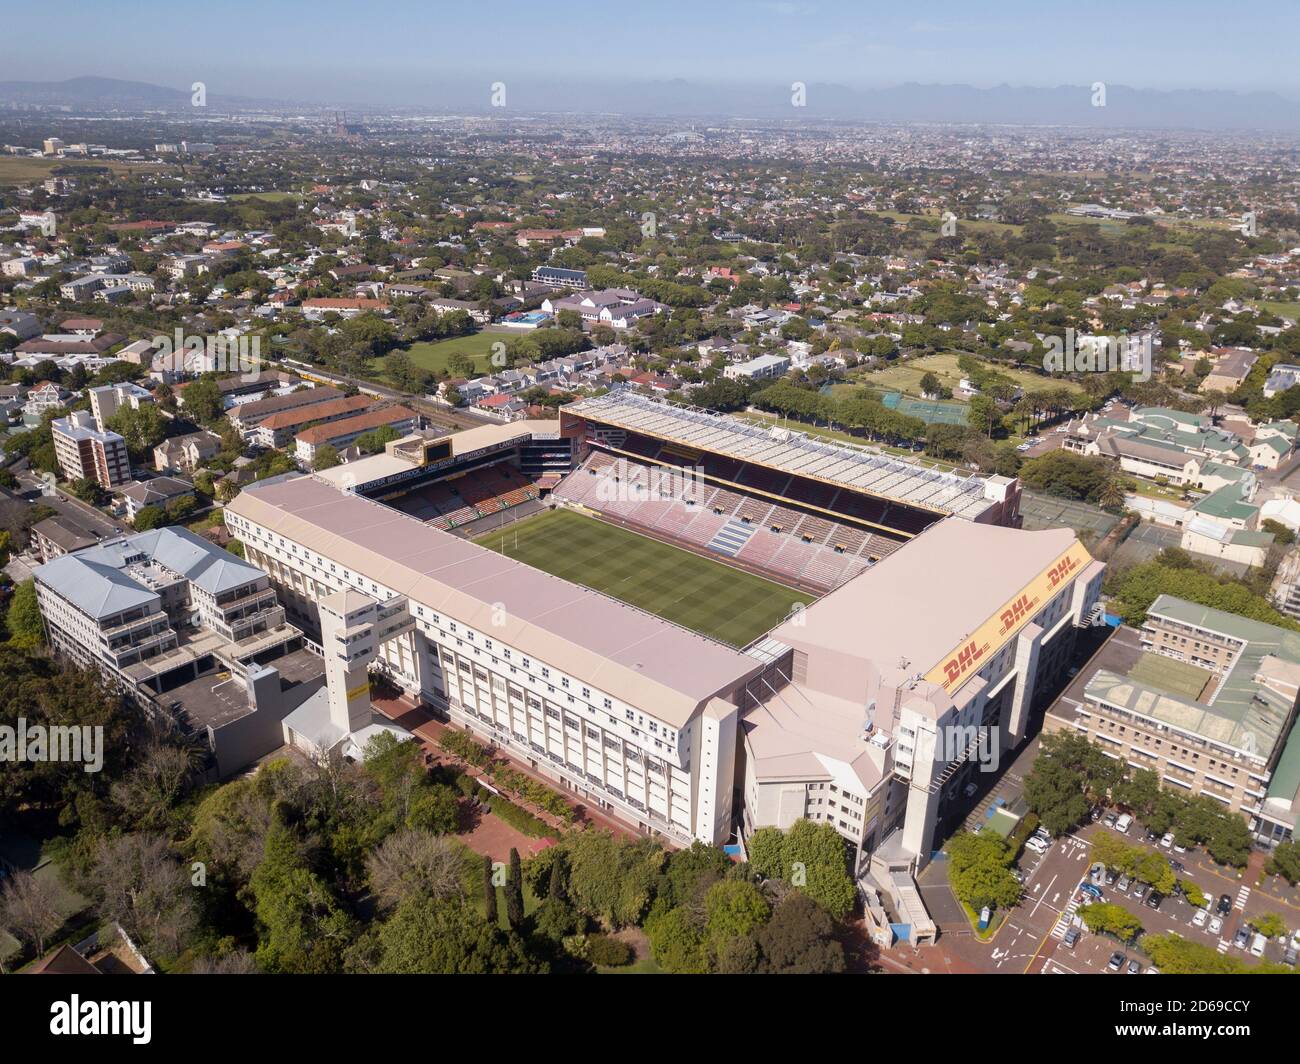 15 October 2020 - Cape Town, South Africa: Newlands rugby stadium in Cape Town, South Africa Stock Photo